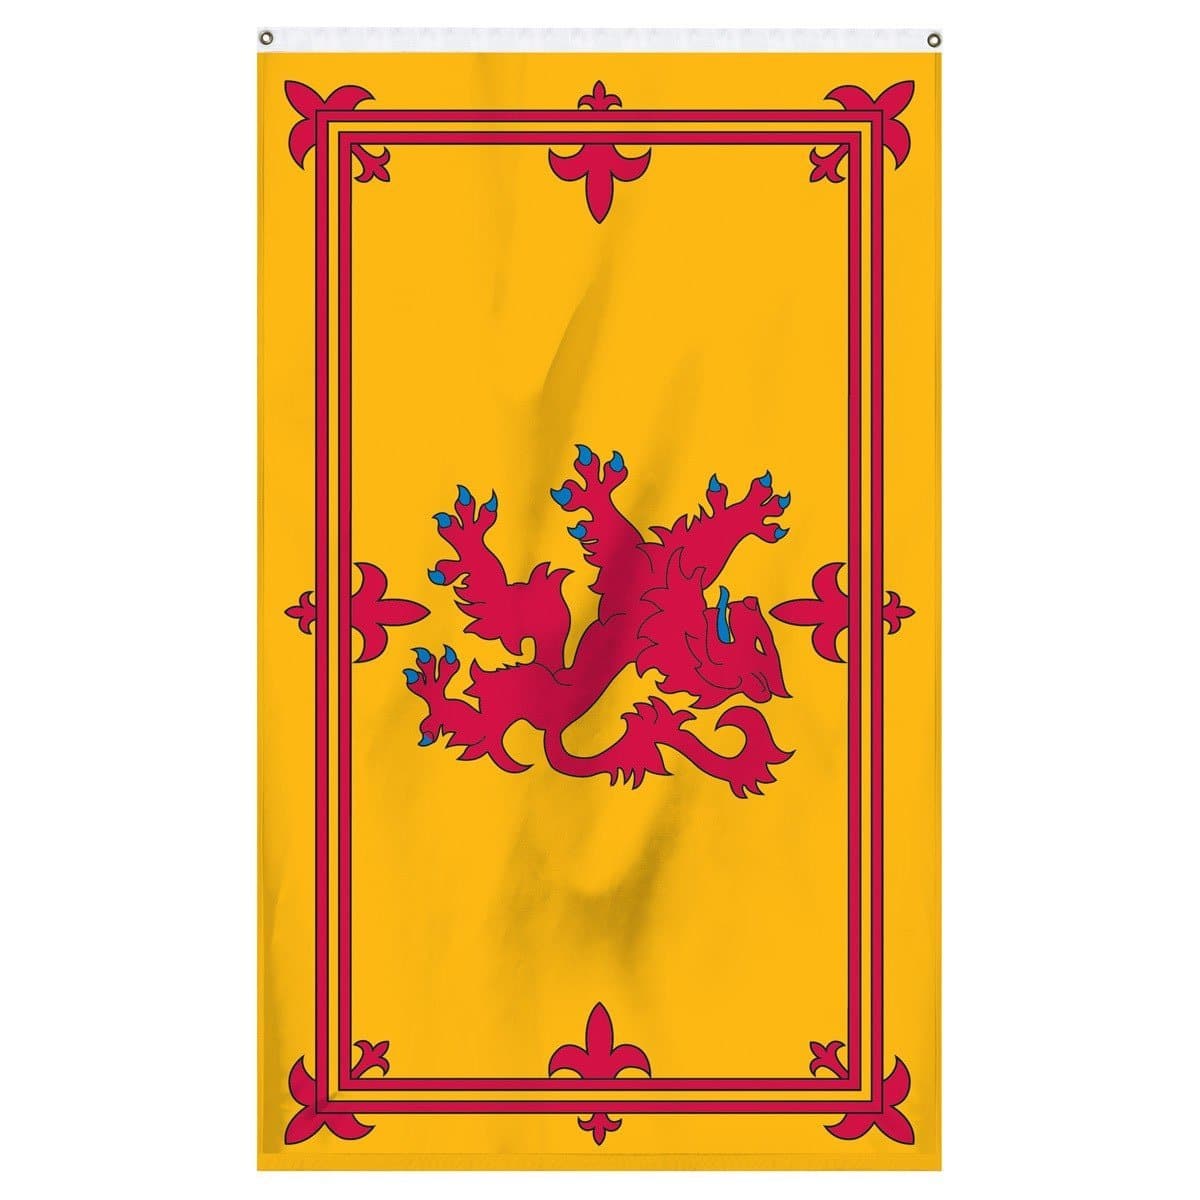 Scotland flag with lion national flag for sale to buy online. Yellow flag with red lion on it.